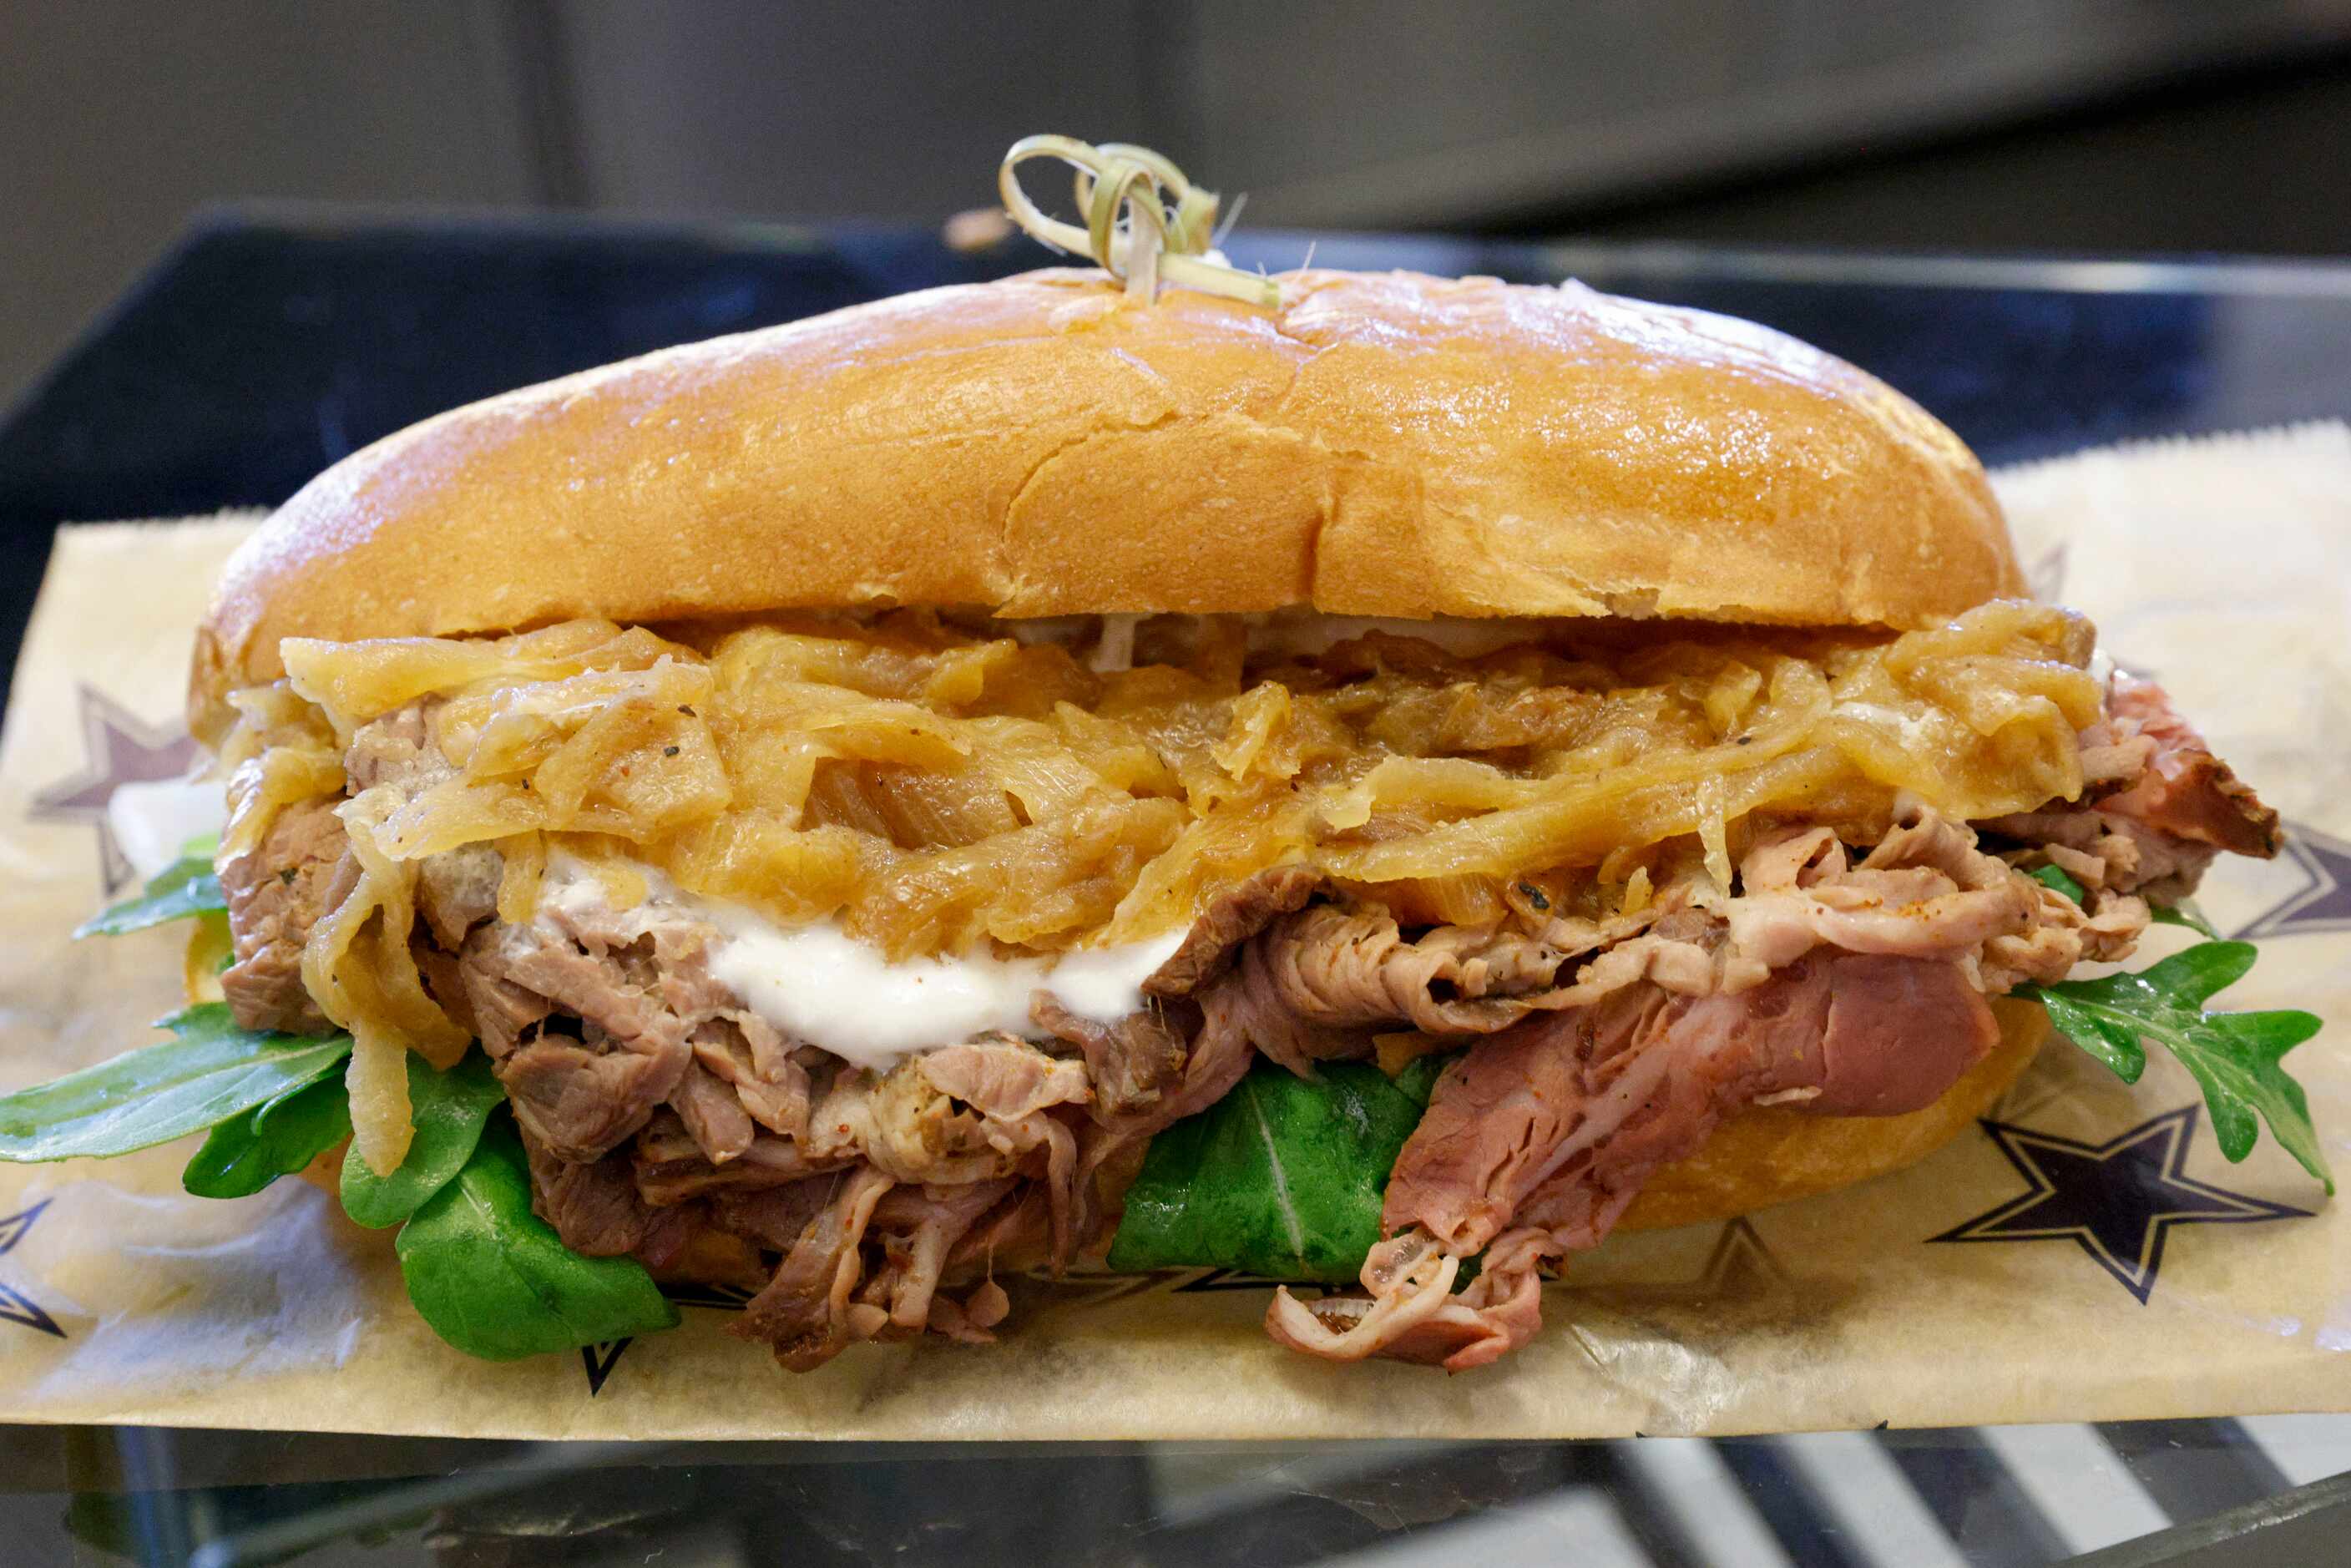 The steak sandwich at AT&T Stadium during Dallas Cowboys games comes with sliced beef,...